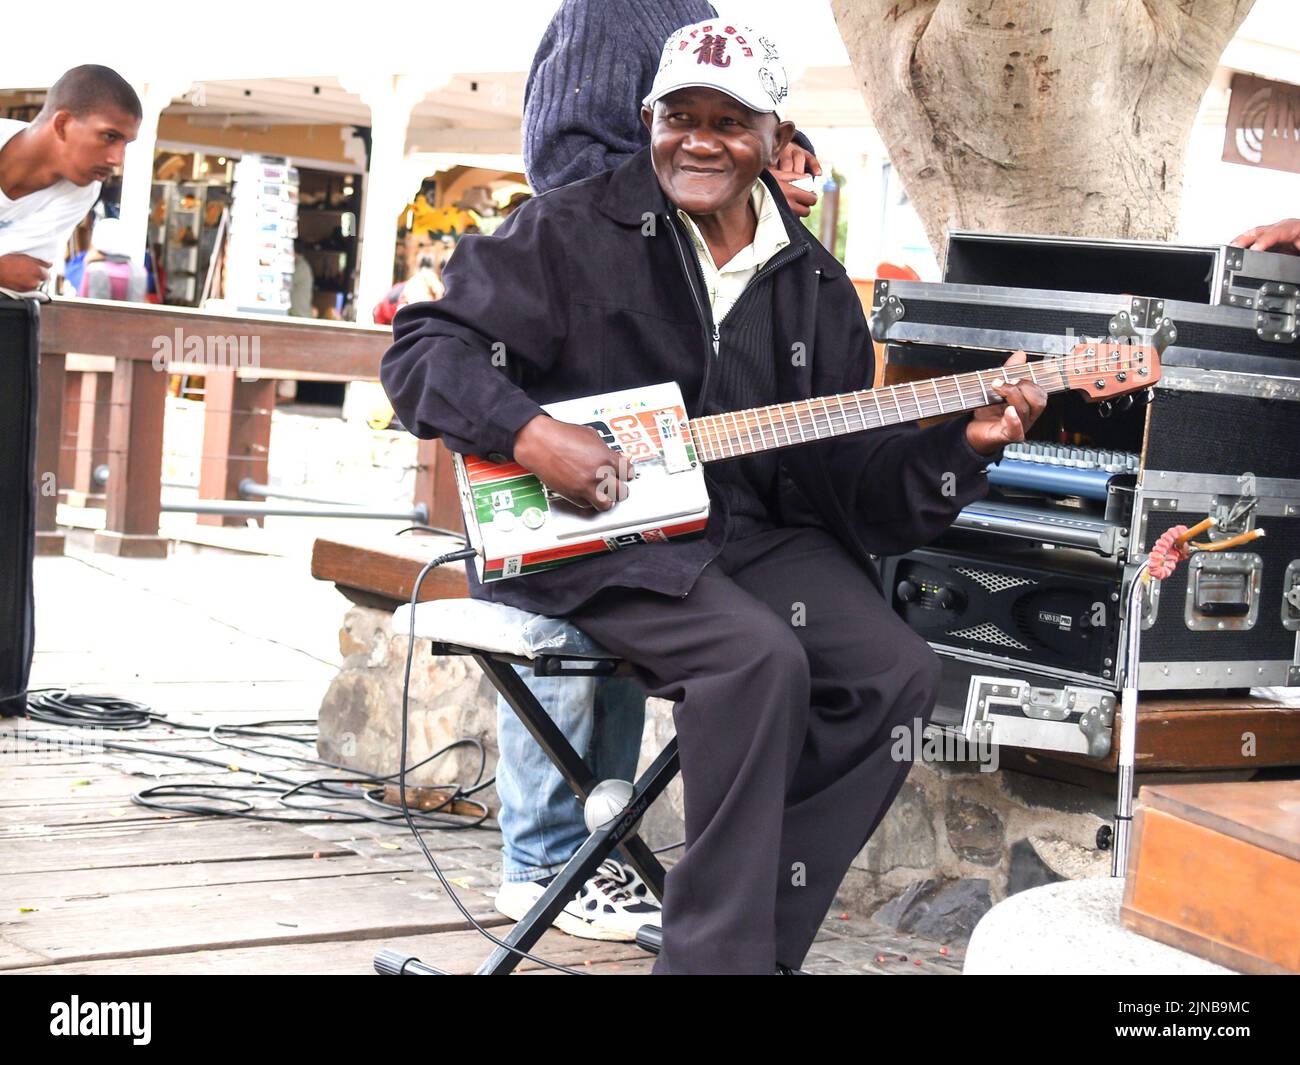 Cape Town South Africa - August 26 2007: African man sitting in street playing guitar made out of old oil can in city. Stock Photo